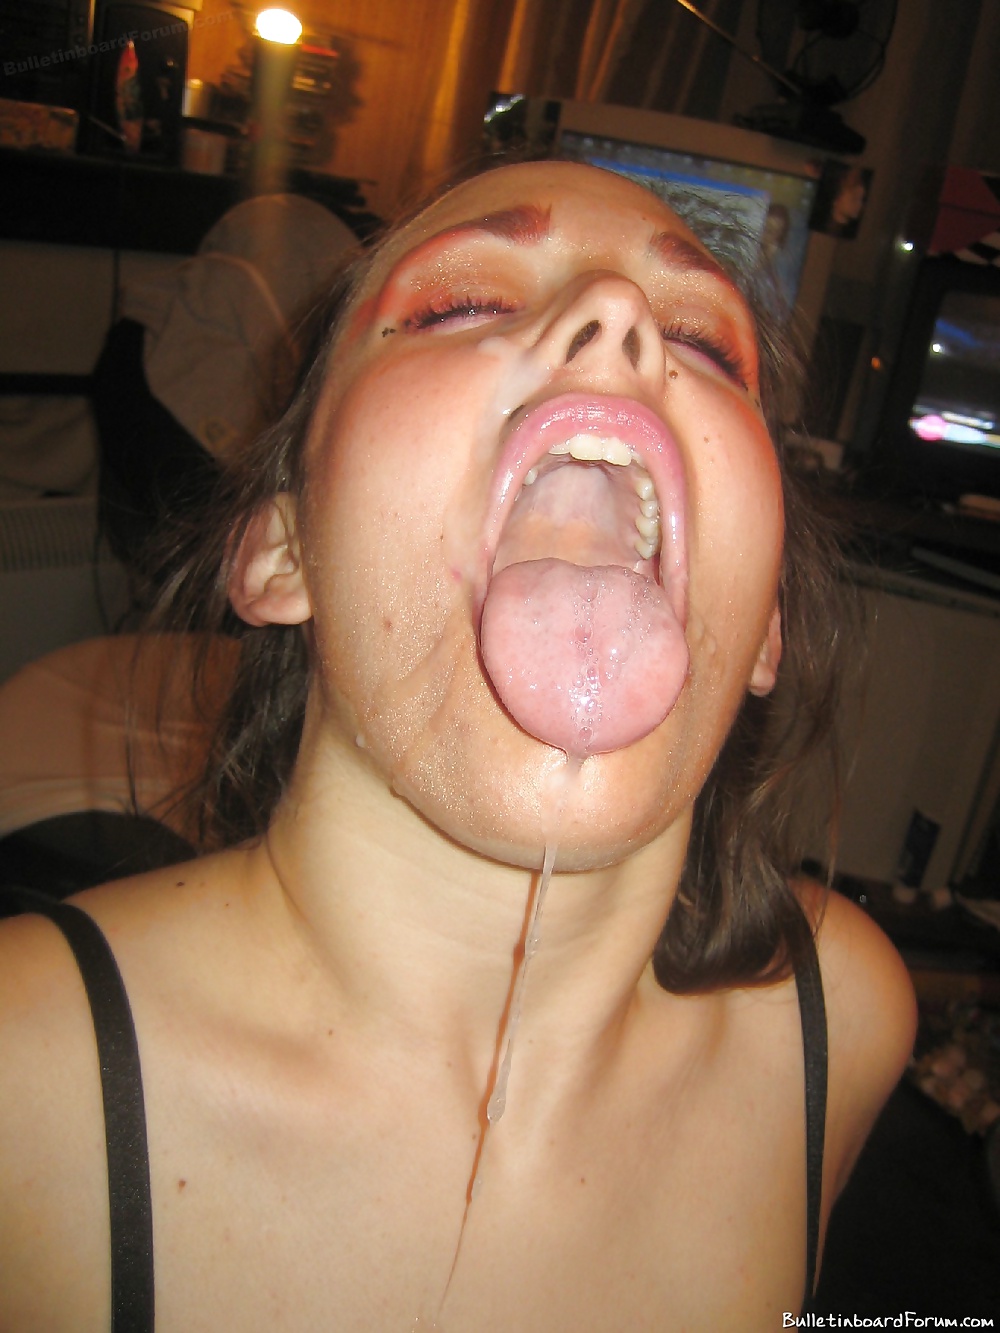 Asian Mouth Open Tongue Out - Mouth Open And Tongue Out Ready For Cum Pics Xhamster 8056 | Hot Sex Picture